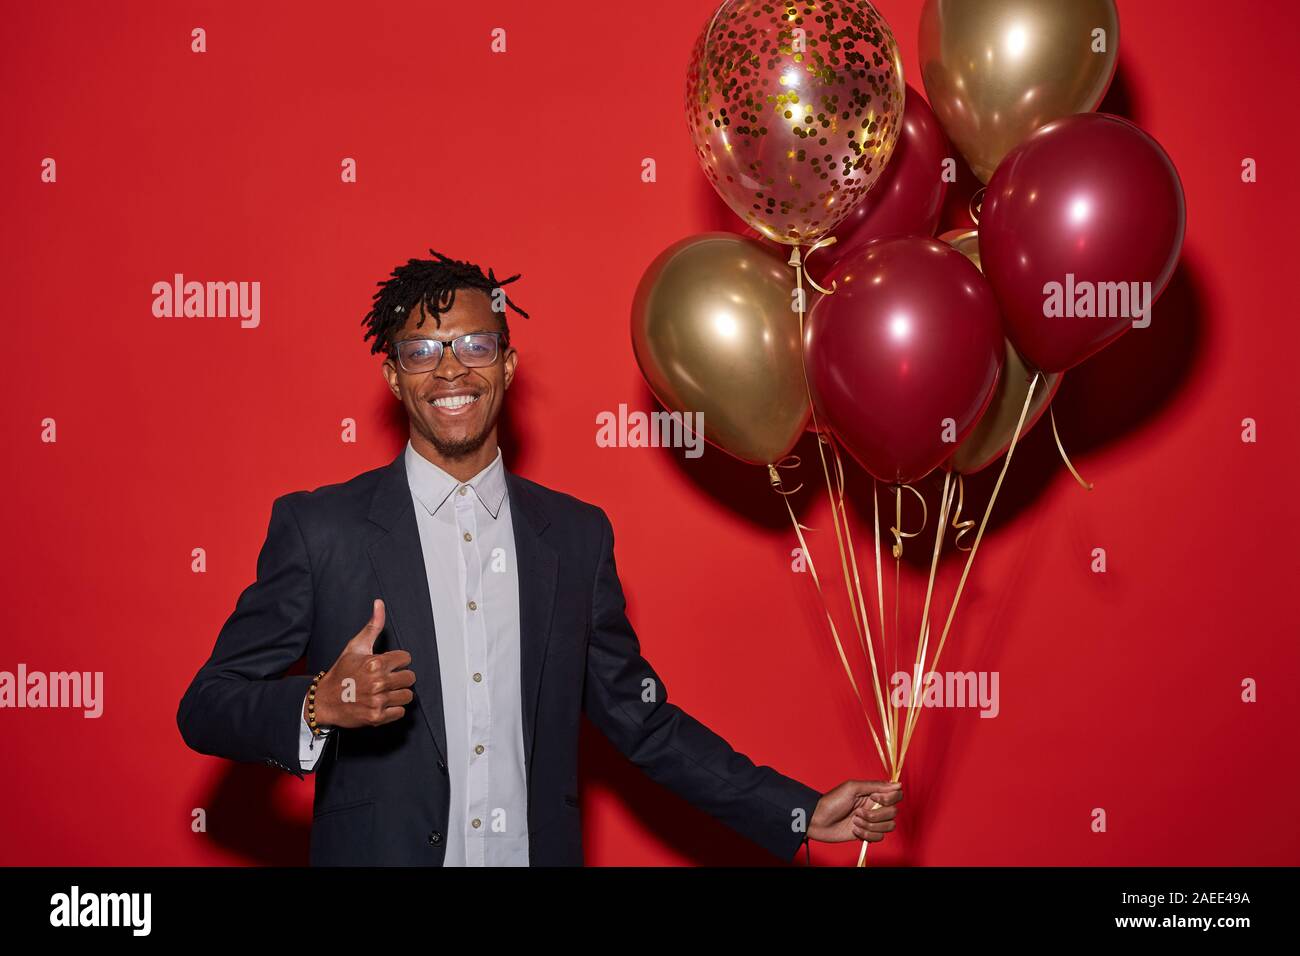 Waist up portrait of smiling African man showing thumbs up and holding bunch of golden balloons while standing against red background at party, copy space Stock Photo